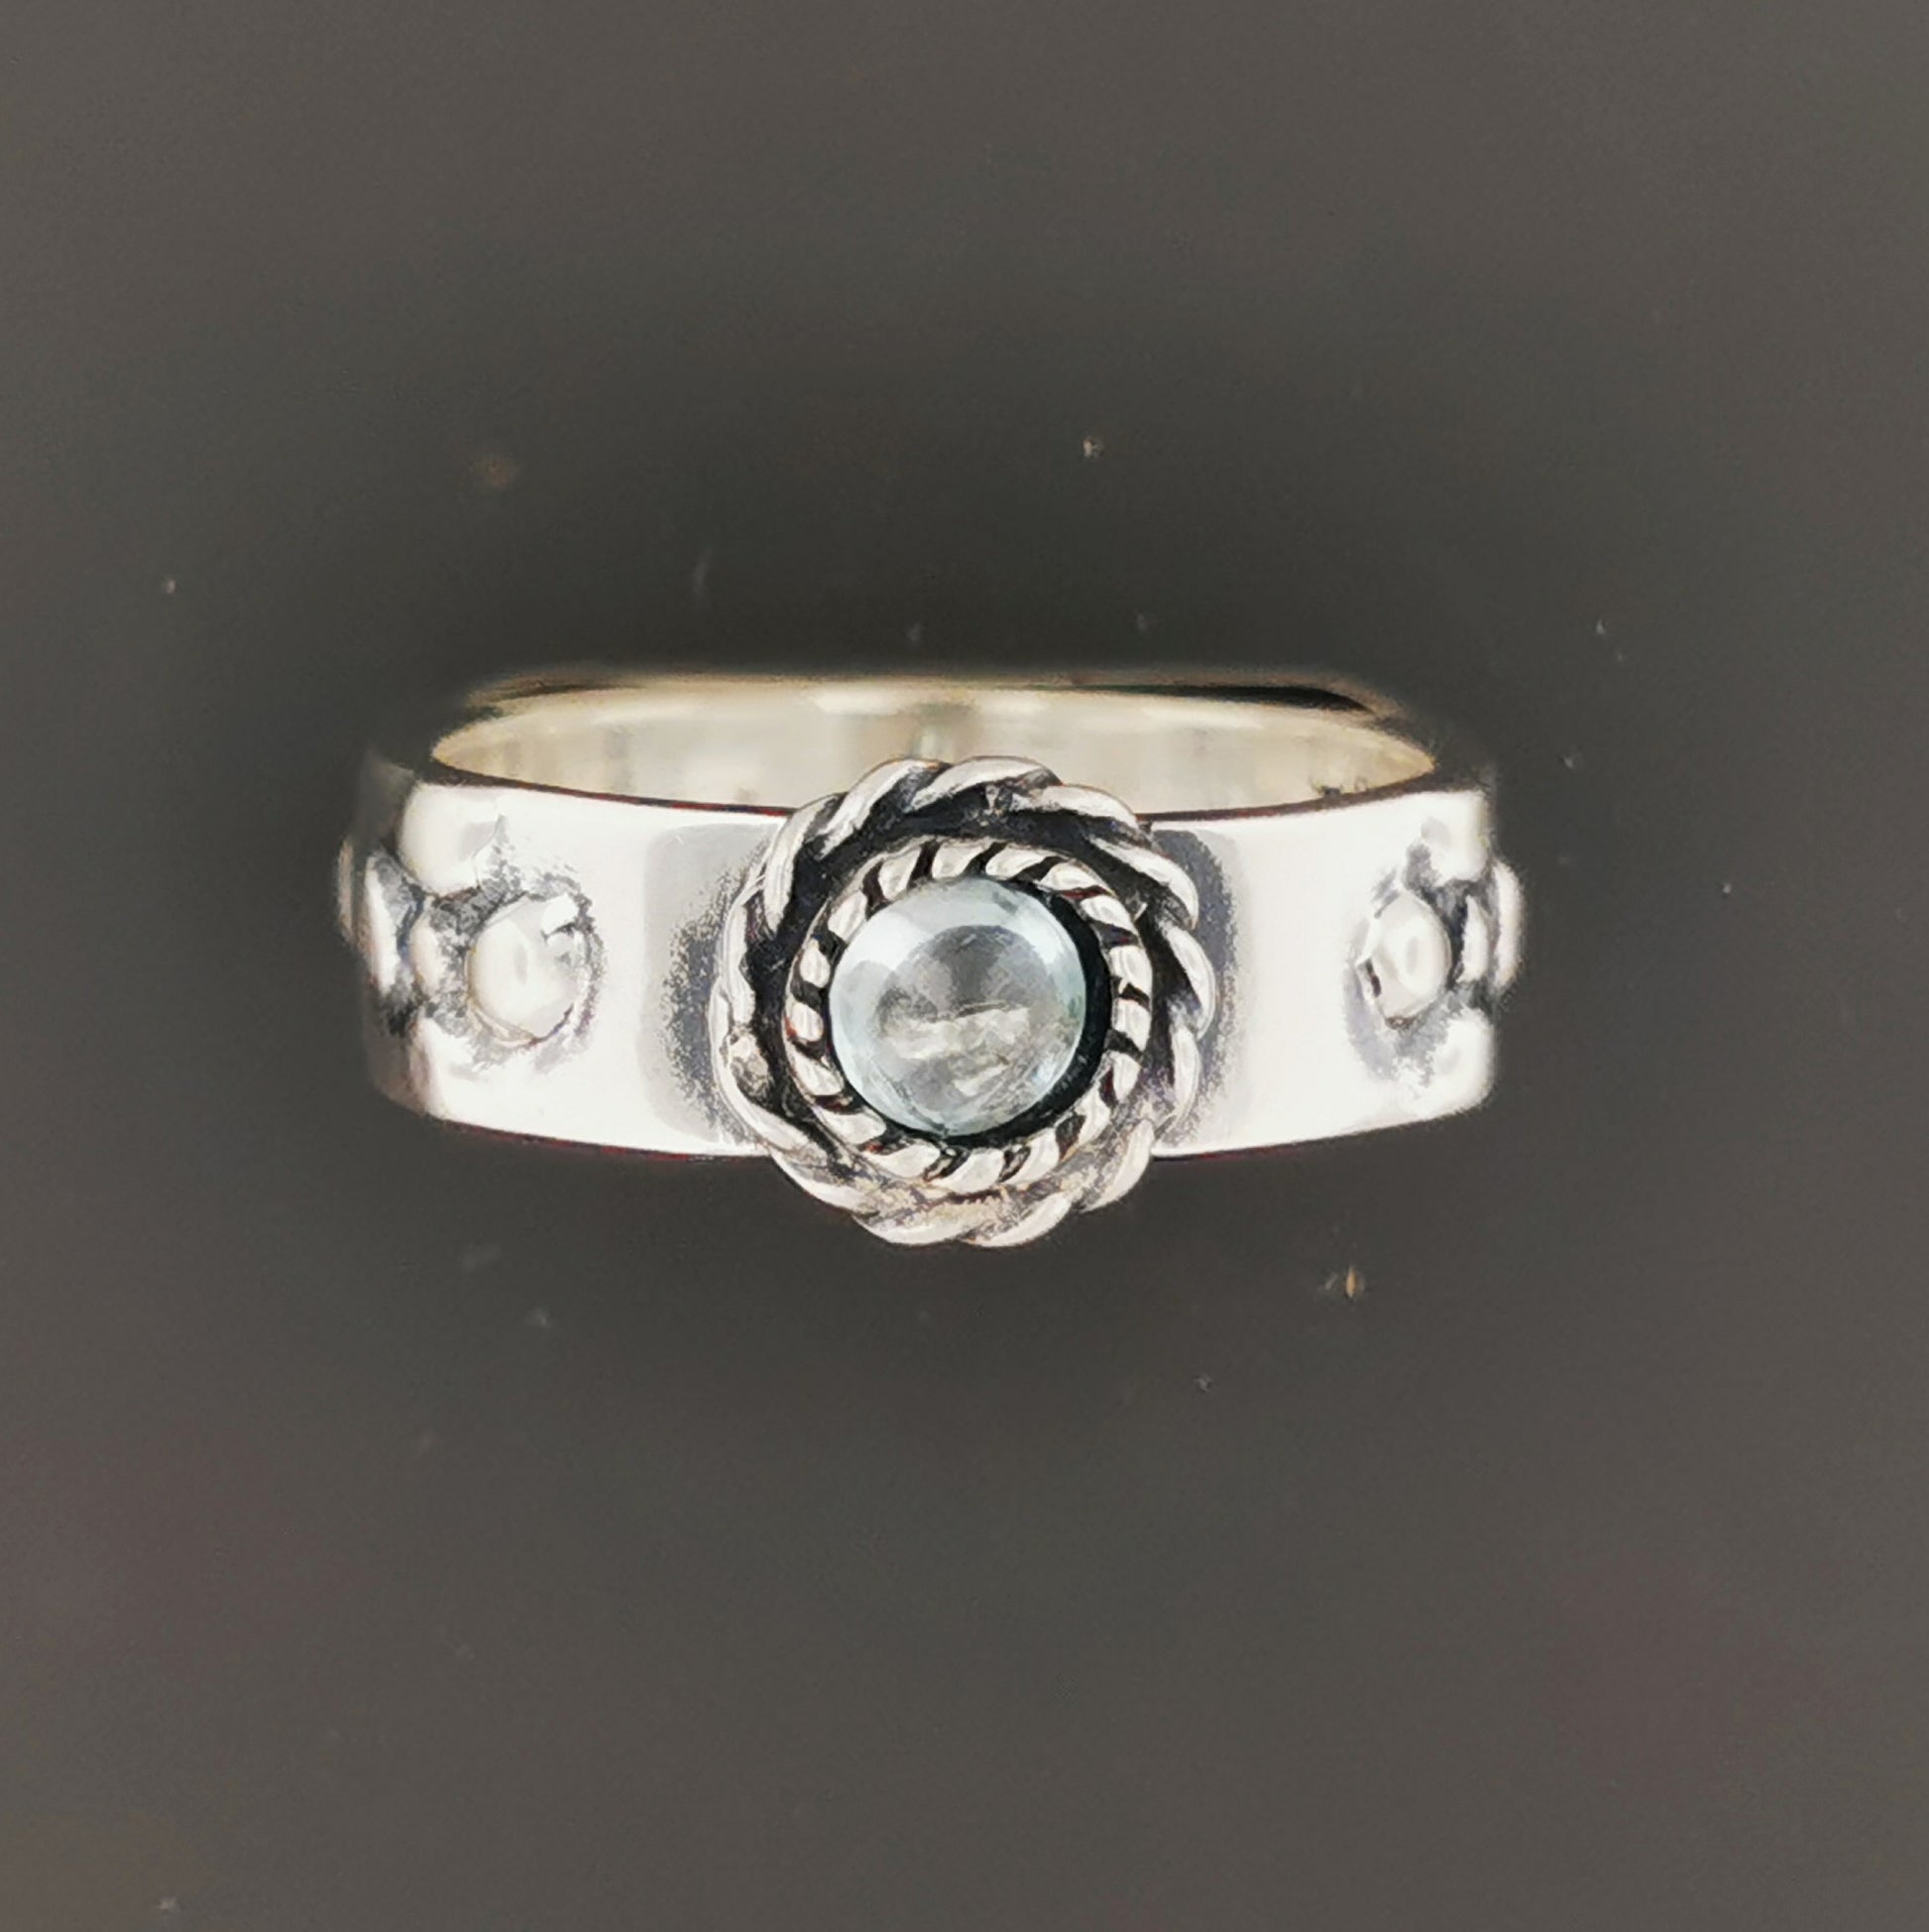 Howls Calcifer Fire Ring in Sterling Silver with Genuine Gemstone, Howls Moving Castle Ring, Howl and Sophie Rings, Silver Howls Moving Castle Ring, Calcifer Silver Ring, Gemstone Engagement Ring, Howls Moving Castle Ring with genuine blue topaz